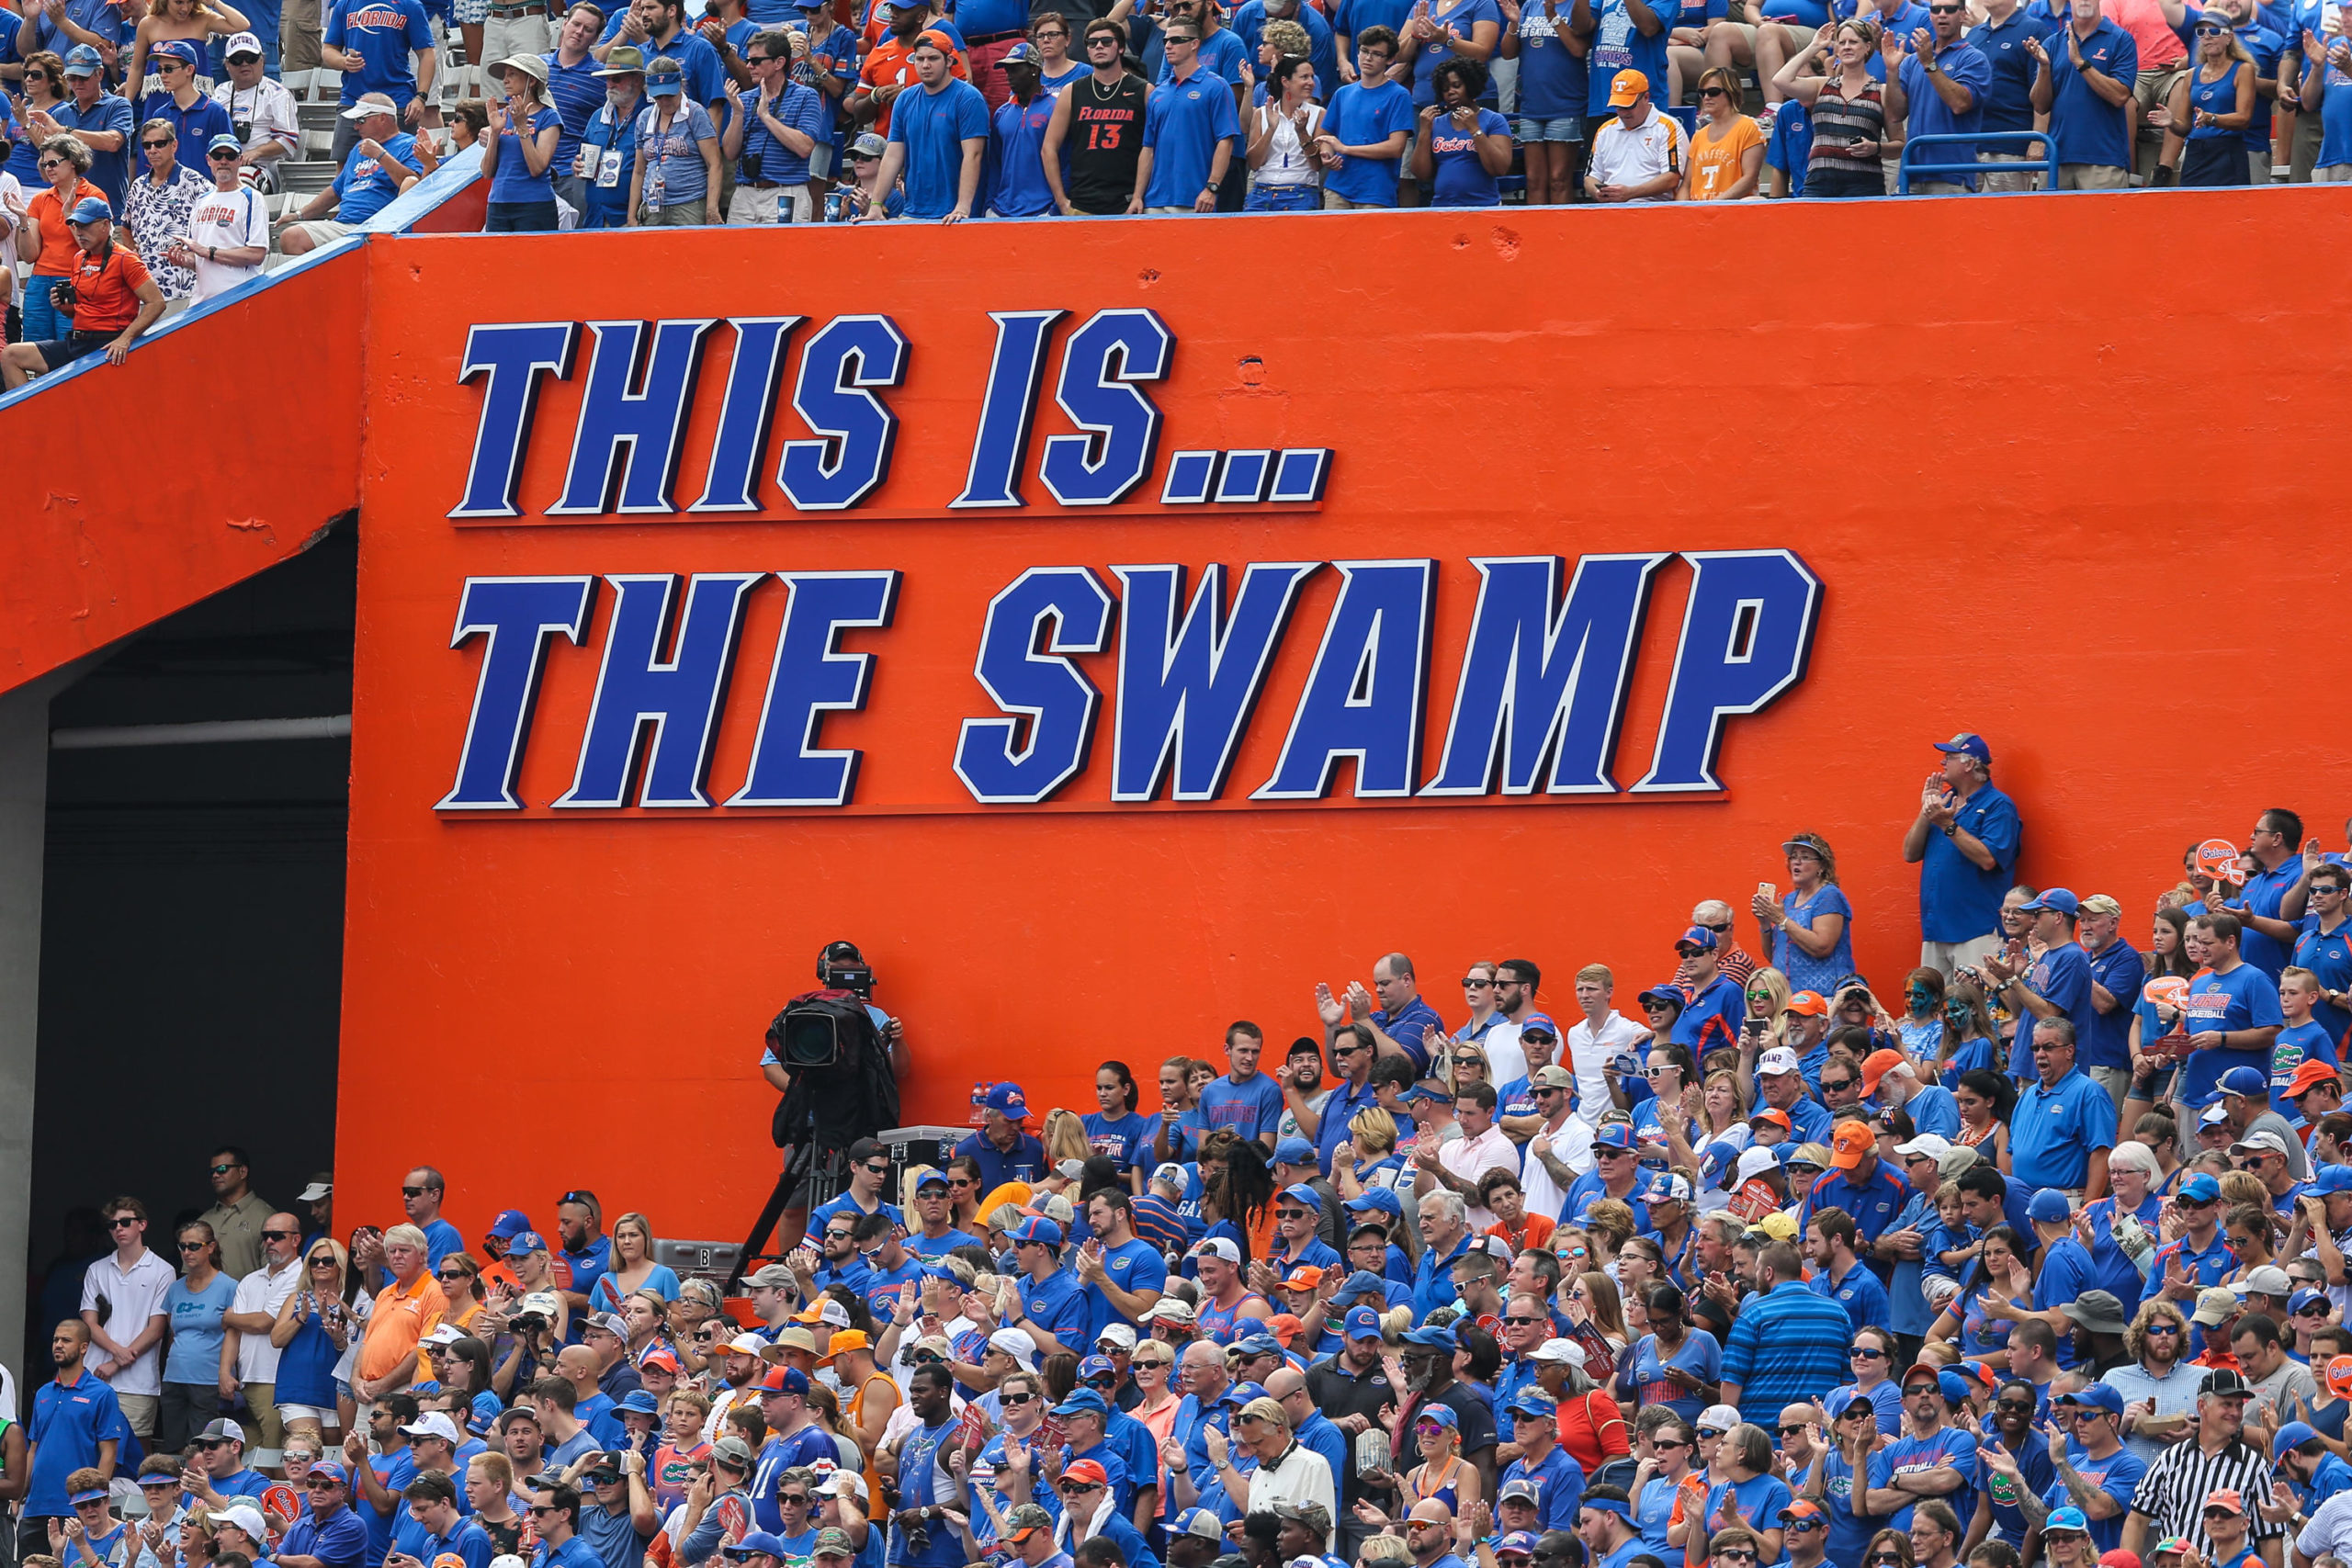 KJ JEfferson is used to playing in front of crowds such as 'The Swamp'